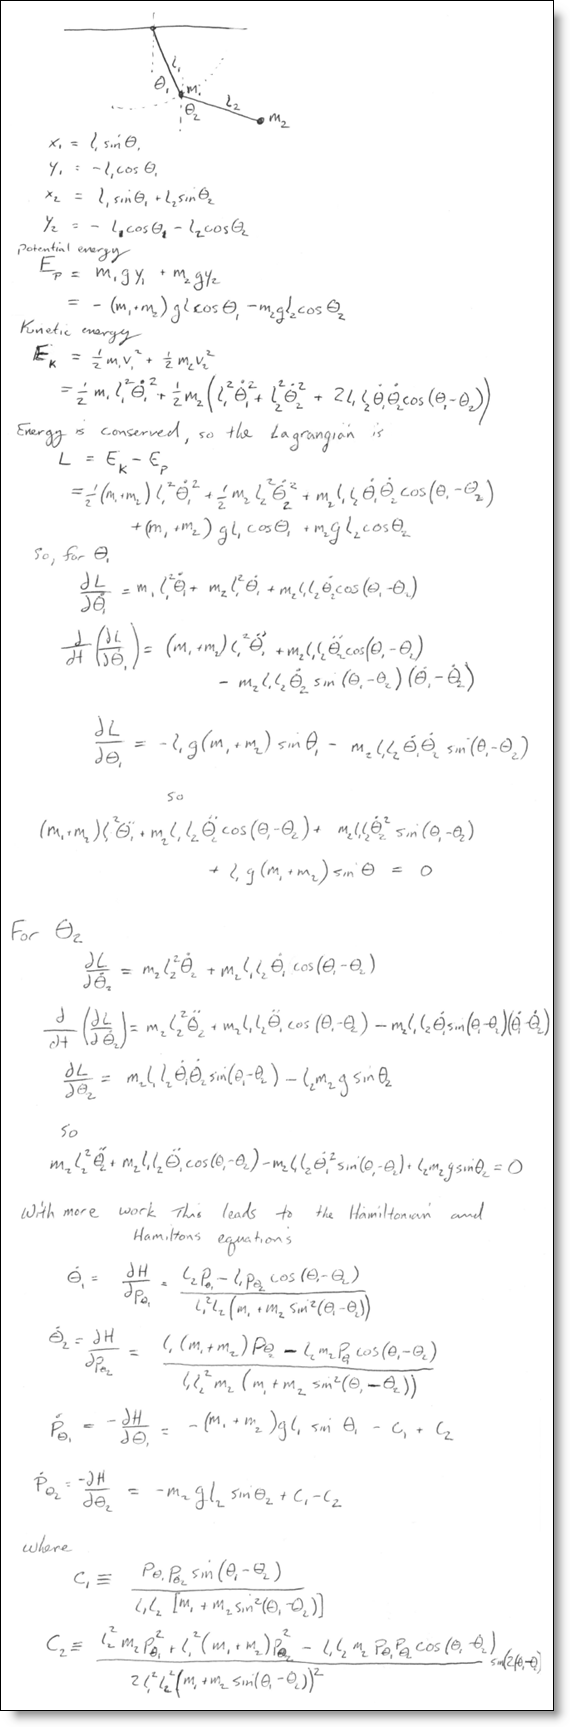 Derivation of the equations of a double pendulum